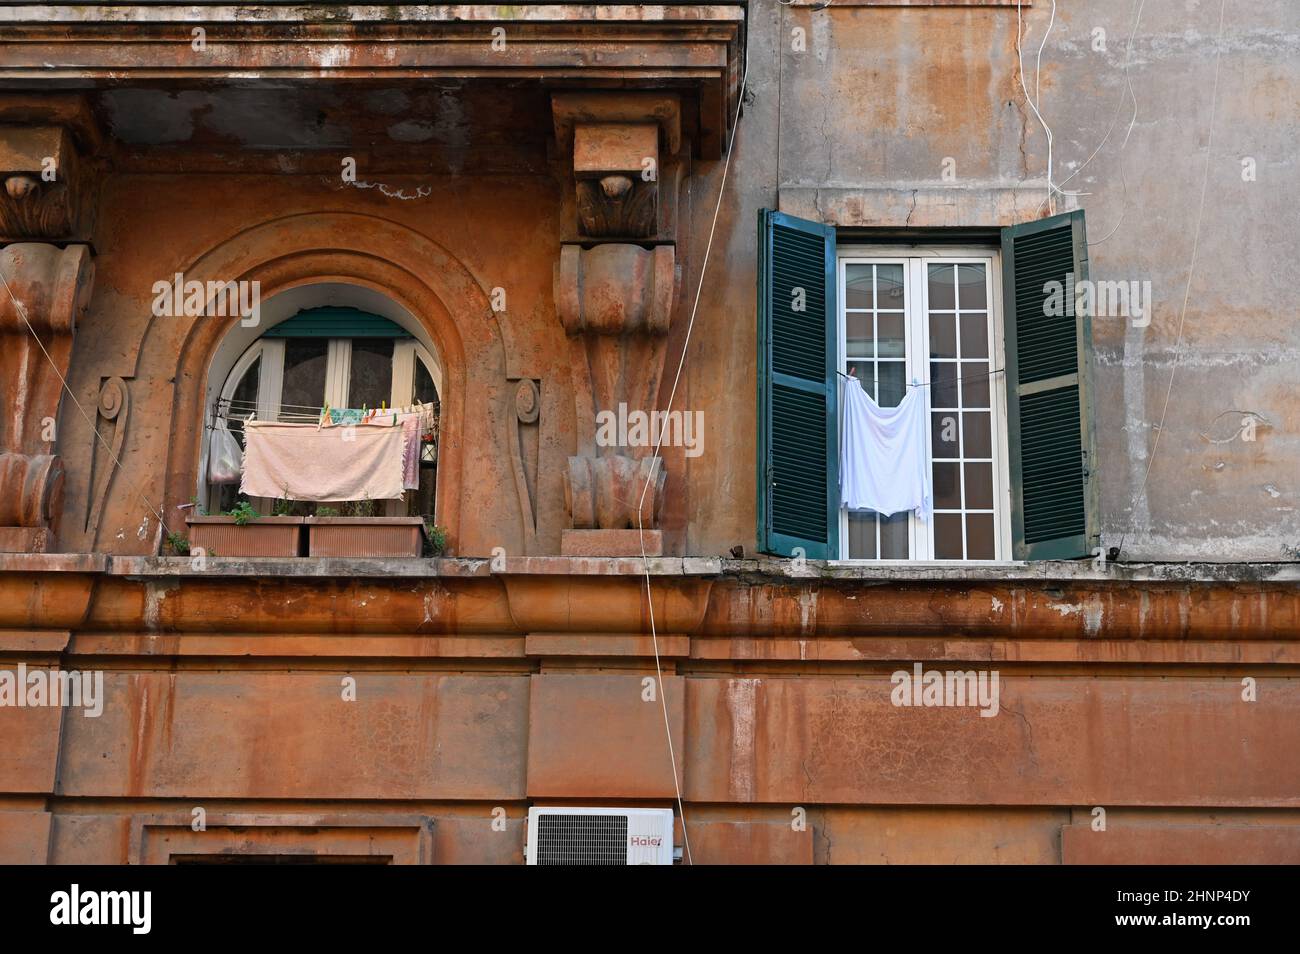 Laundry outside the window in Italy. Stock Photo